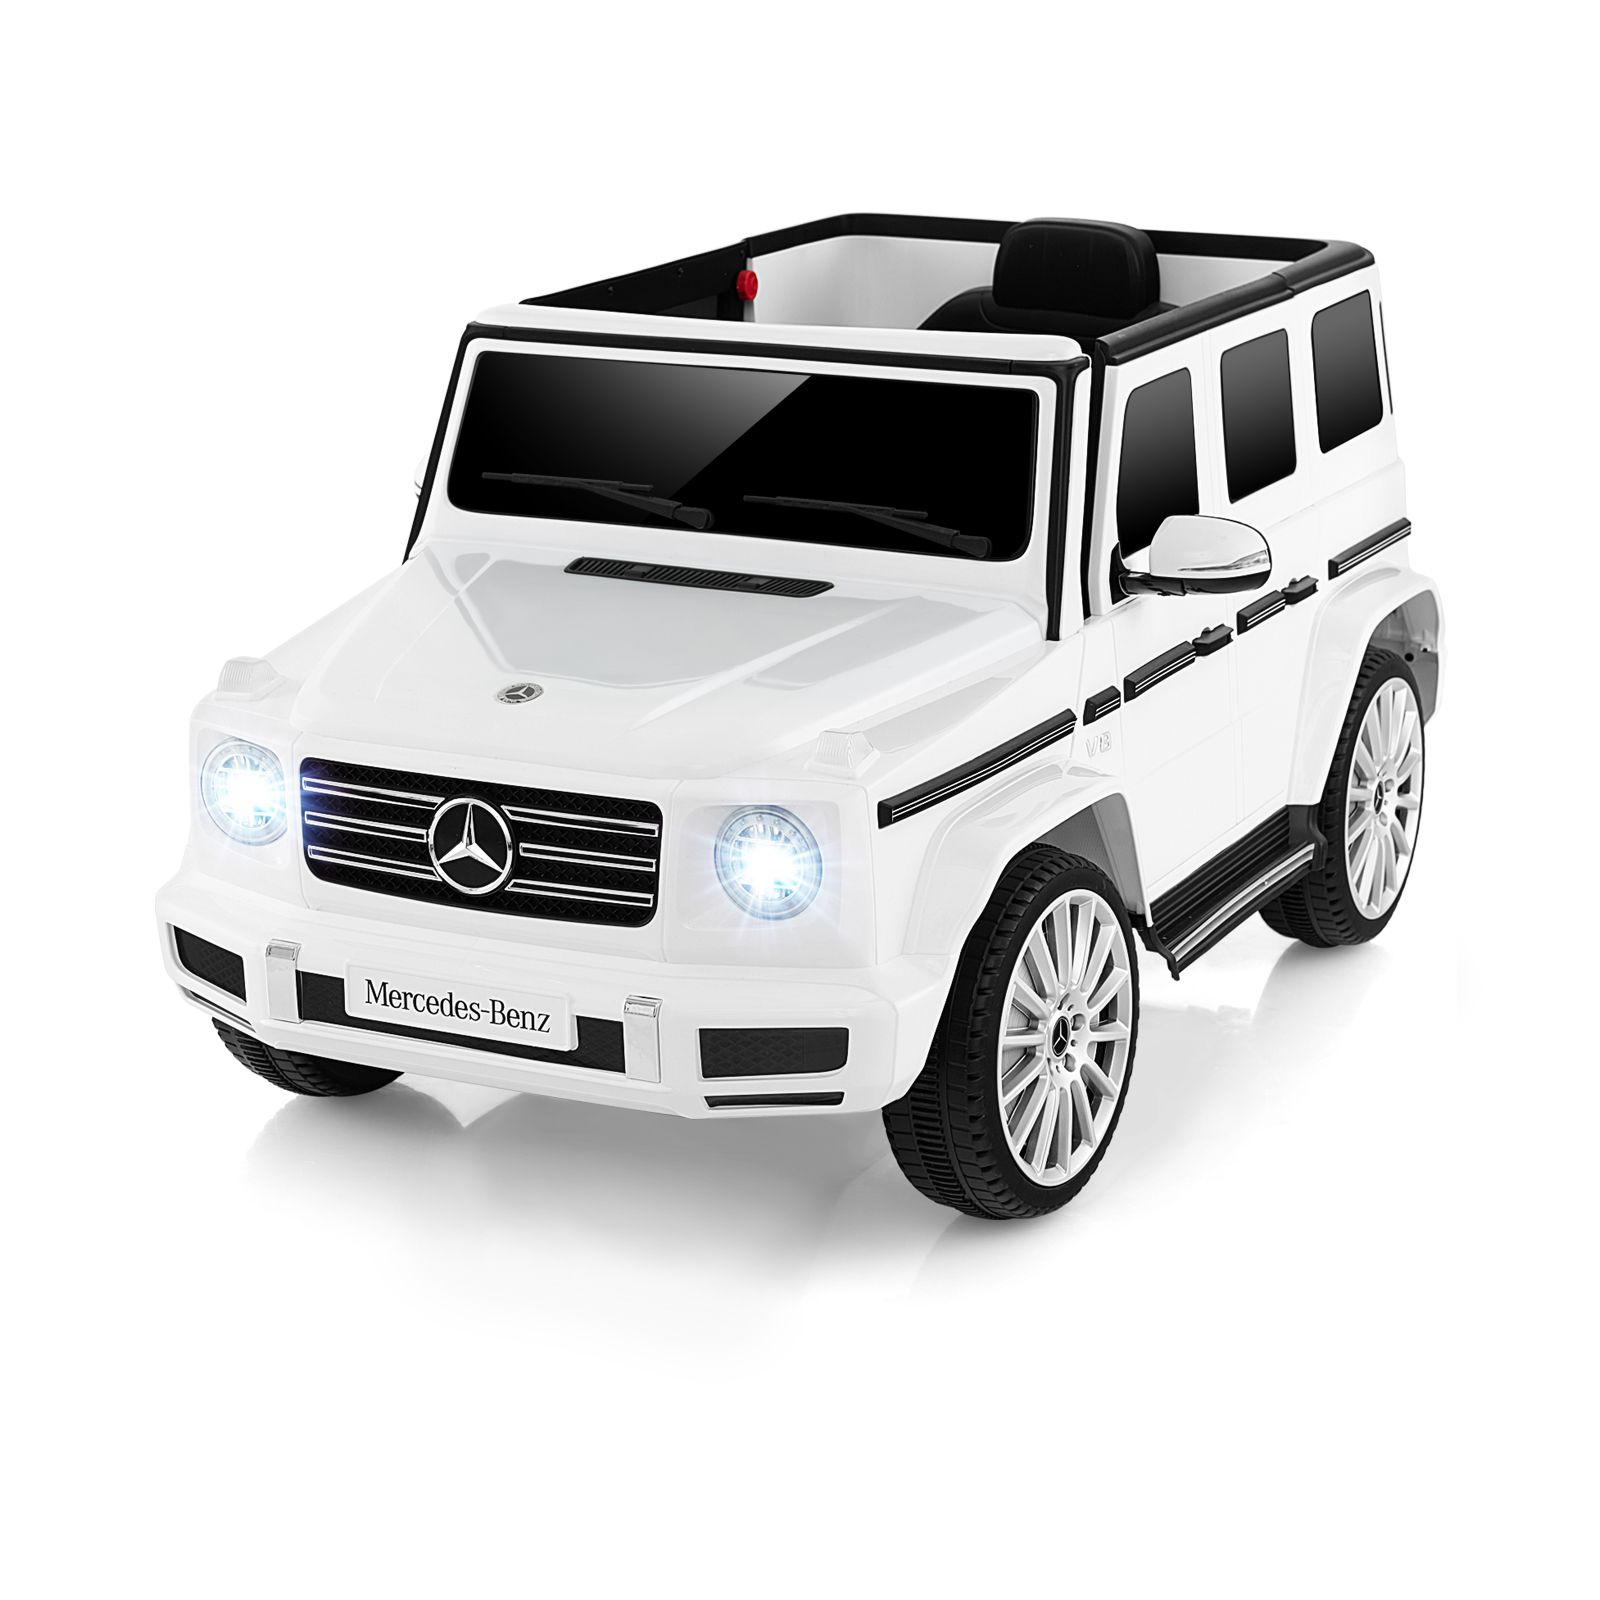 12V Licensed Mercedes-Benz Kids Ride-on Car with Remote Control-White